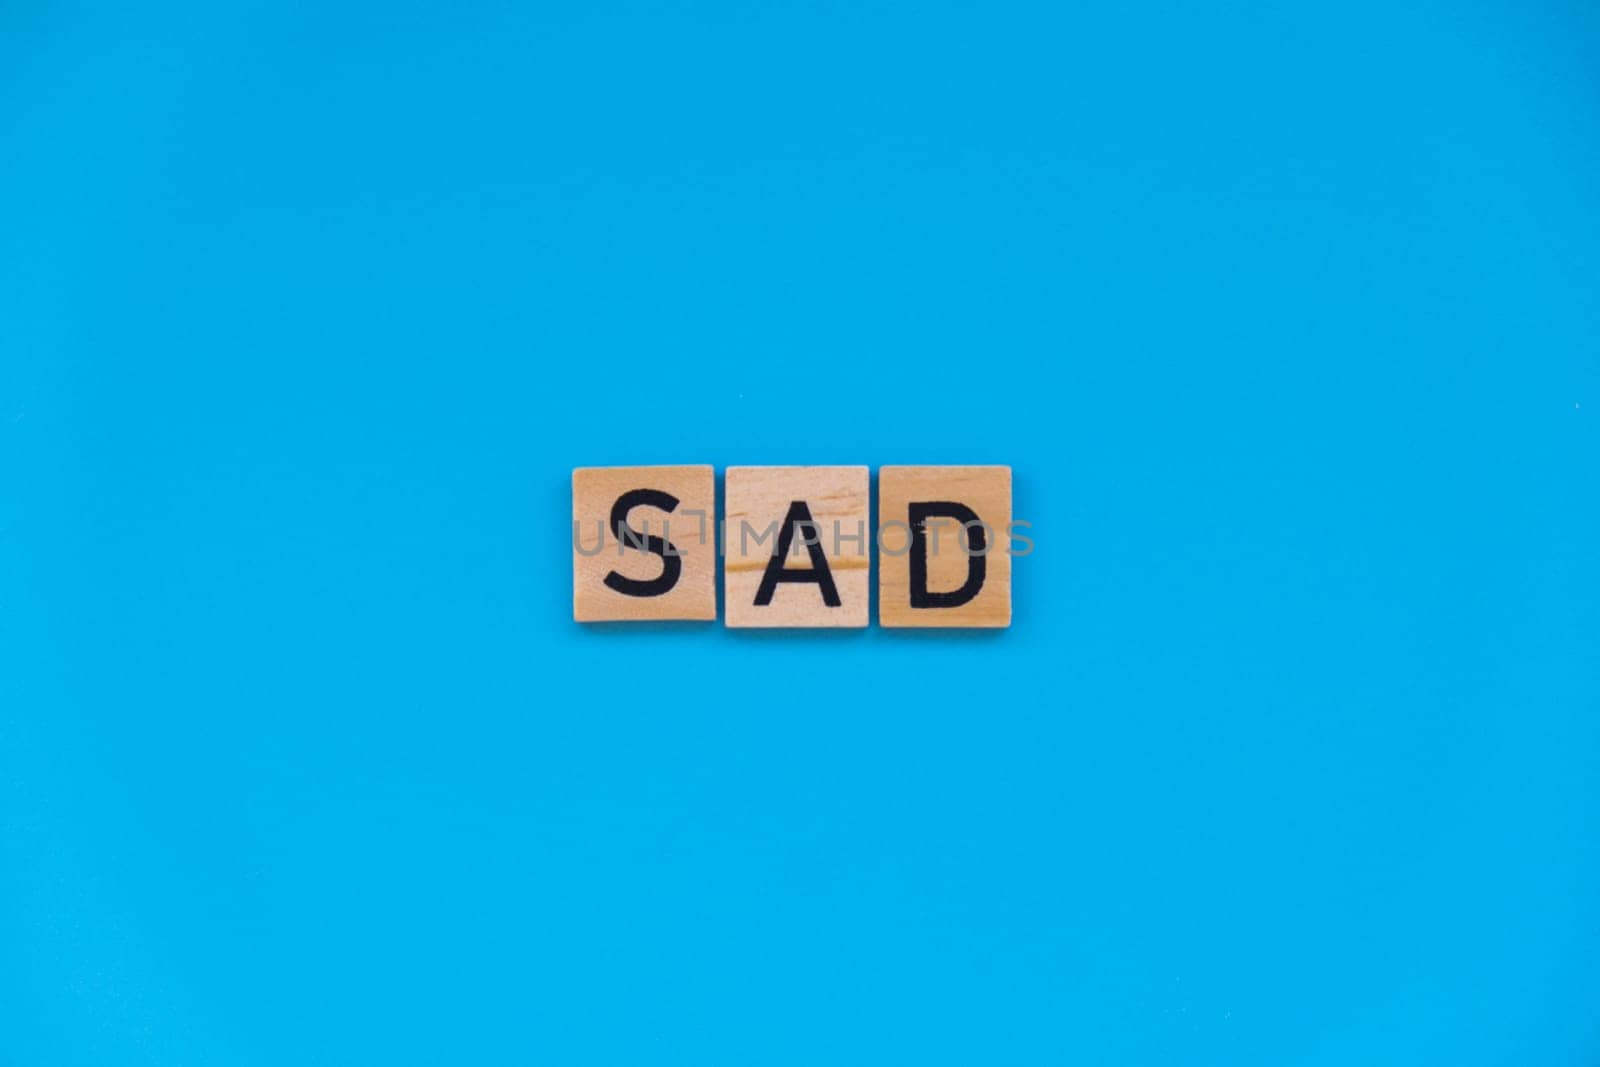 Seasonal affective disorder - text of wooden blocks on blue bright background. Concept of depression mood stress and anxiety. SAD wellbeing